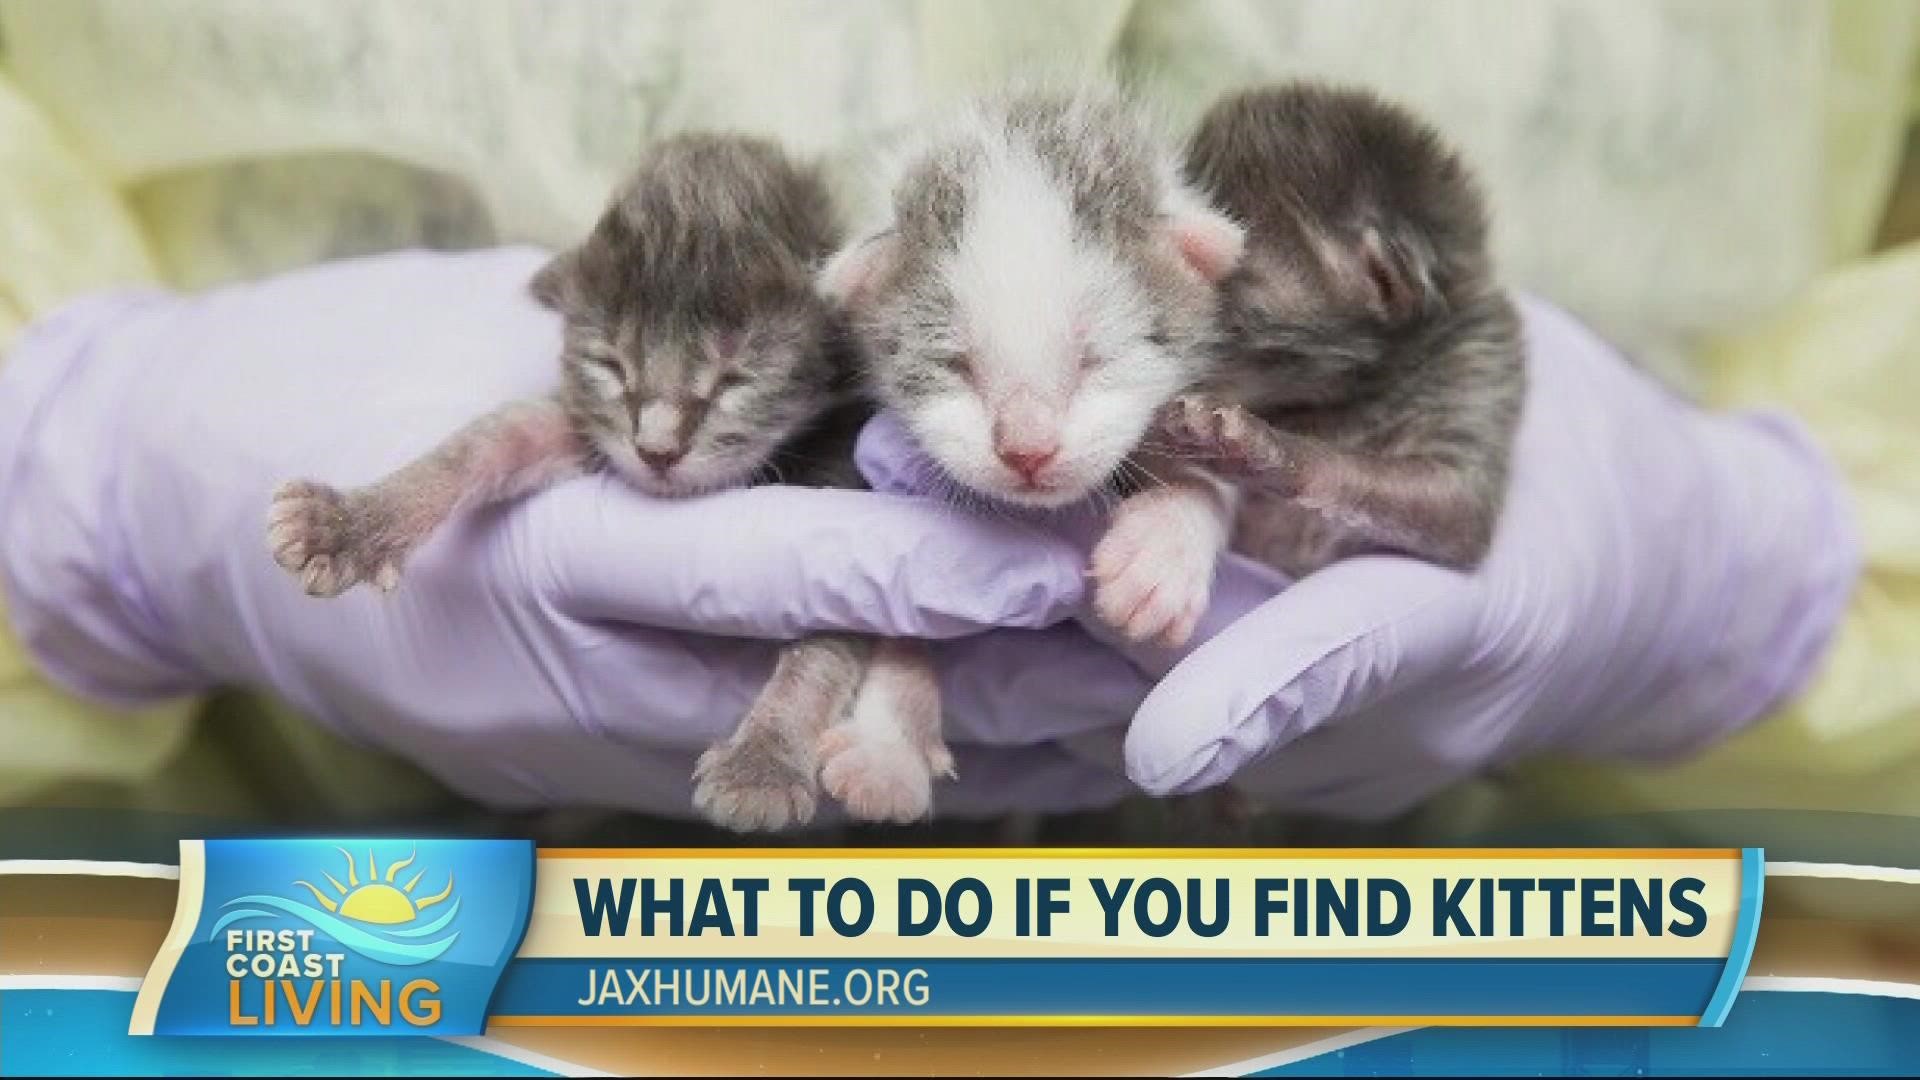 Director of Community Programs, Lindsay Layendecker talks about kitten season and what you need to do if you find a litter of kittens.